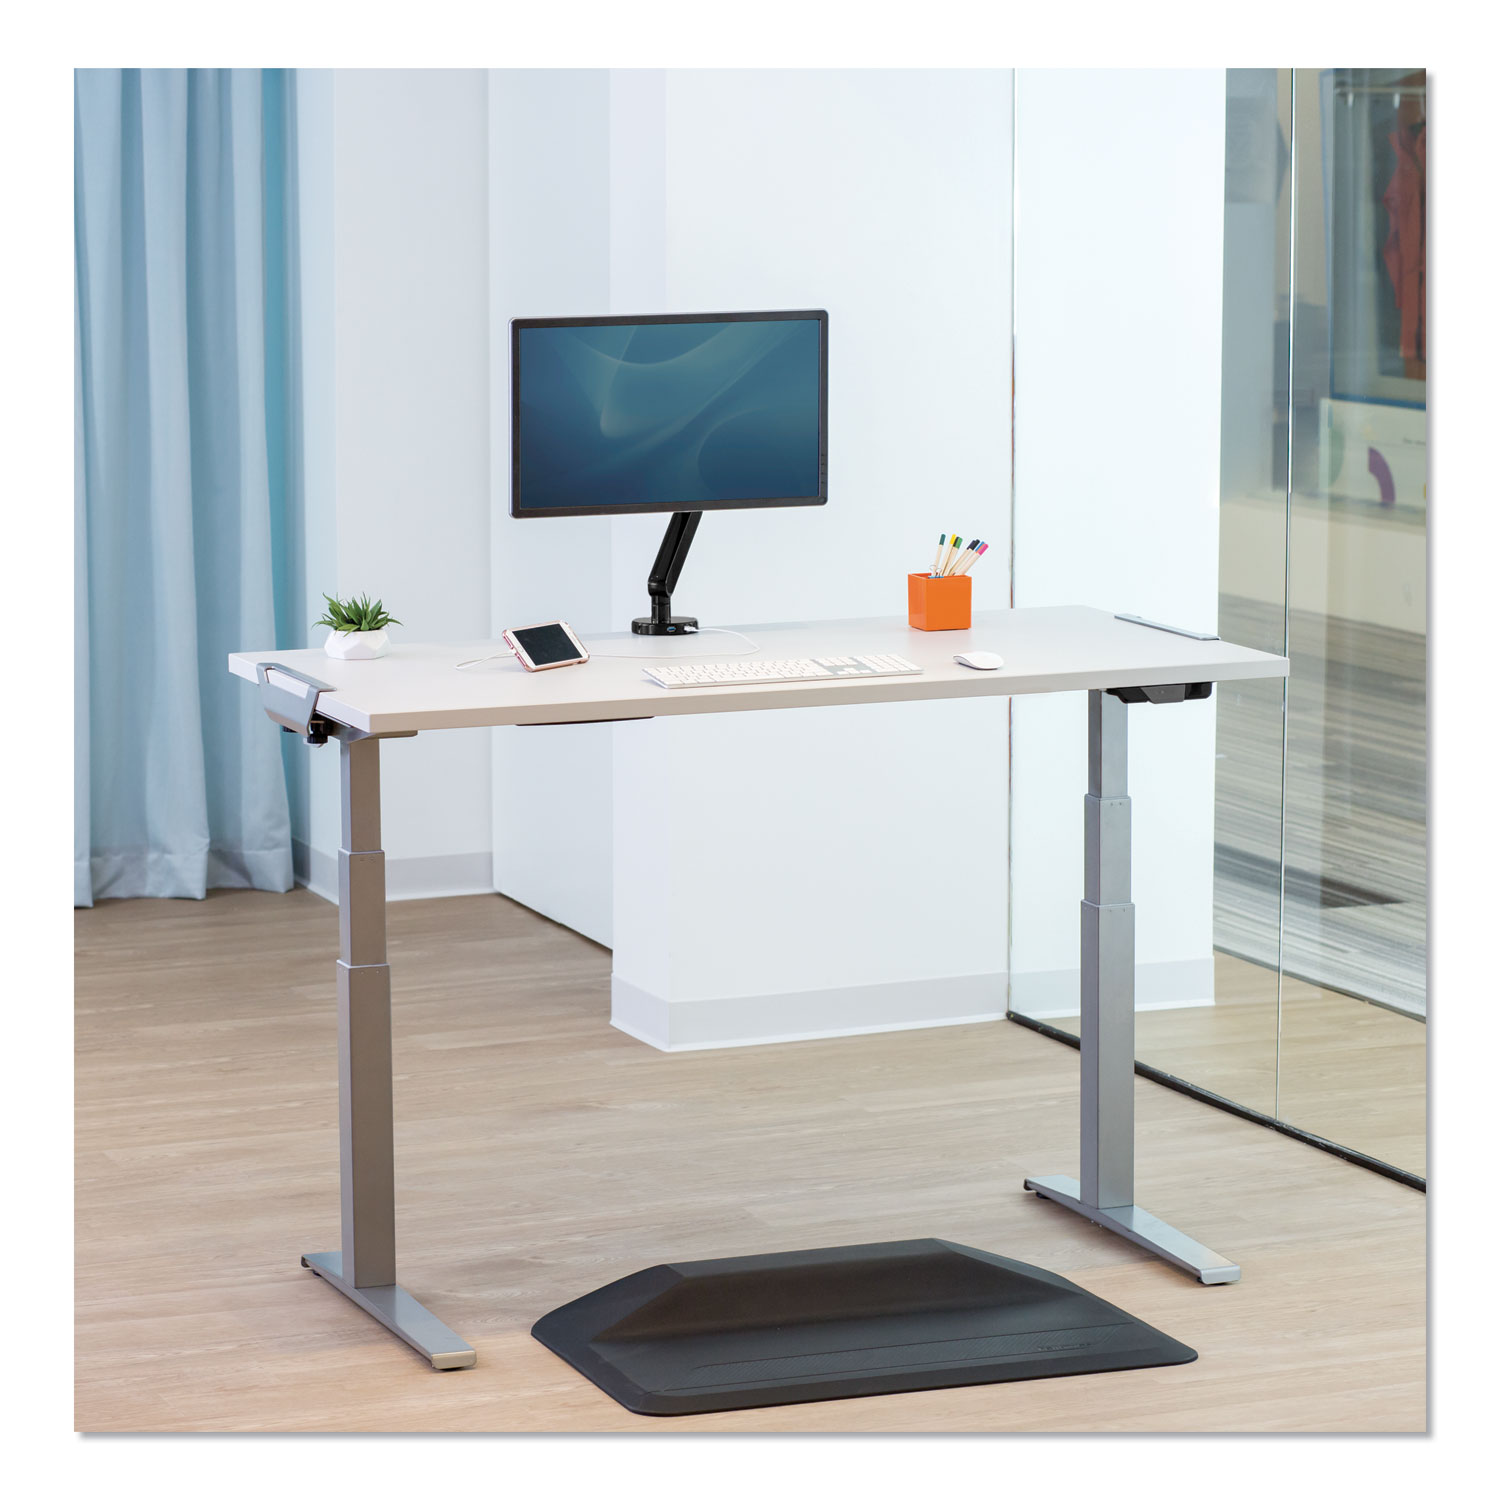  Fellowes 9650001 Levado Laminate Table Top (Top Only), 48w x 24d, Gray Ash (FEL9650001) 